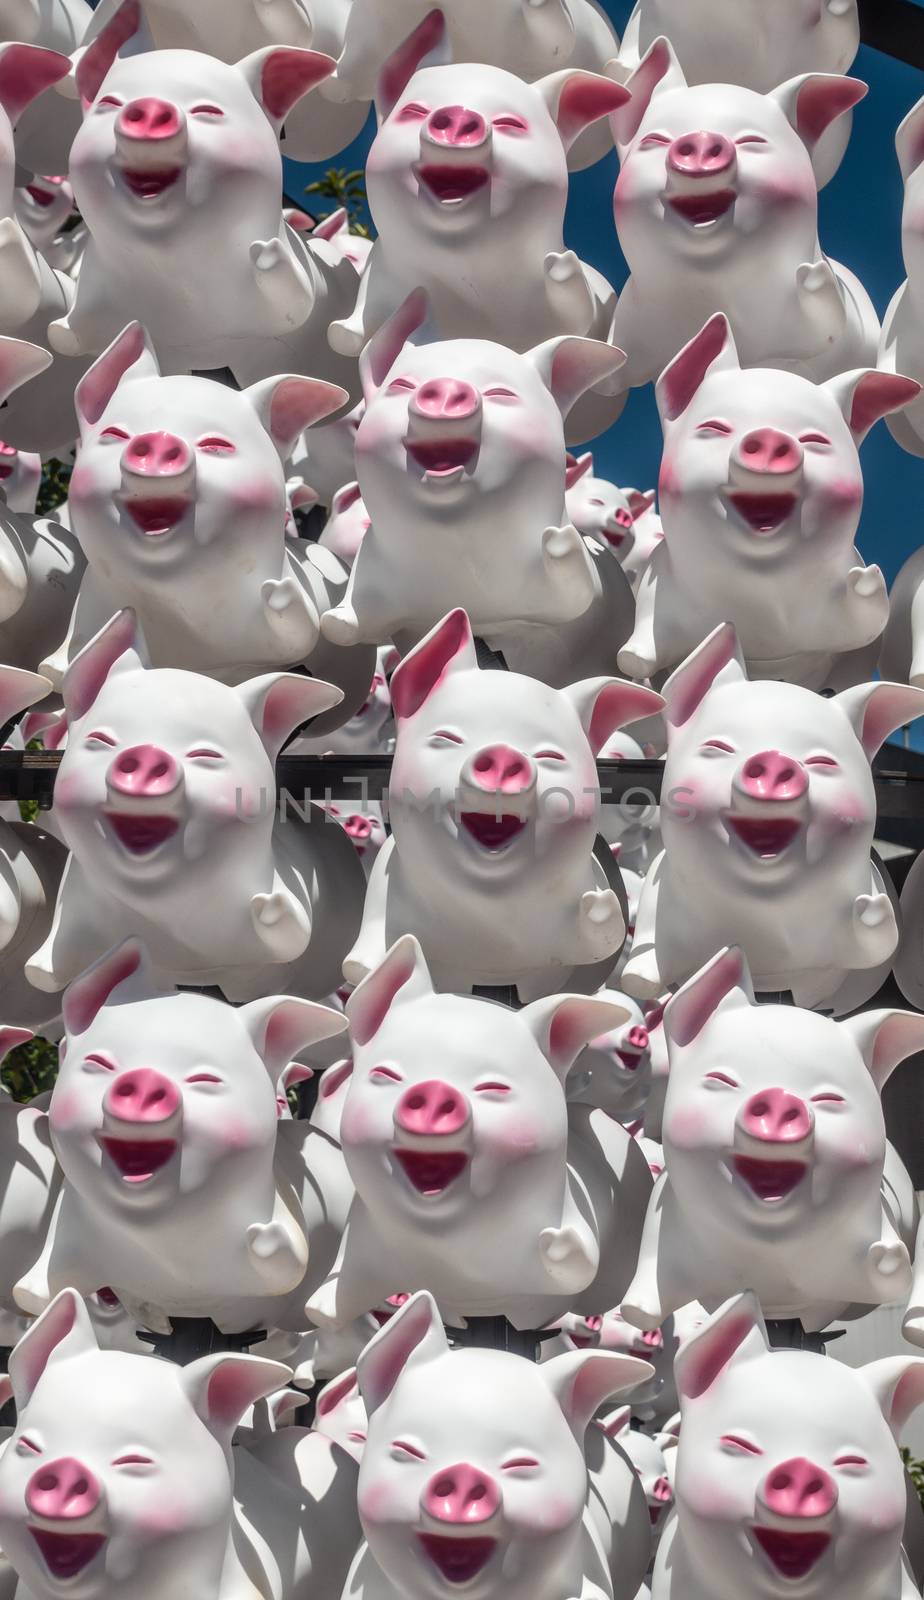 Sydney, Australia - February 9, 2019: Closeup of large display of 15 laughing pig dolls at First Fleet Park downtown to celebrate Chinese Year of the Pig. White skin with pink features such as nose, mouth, eyes.